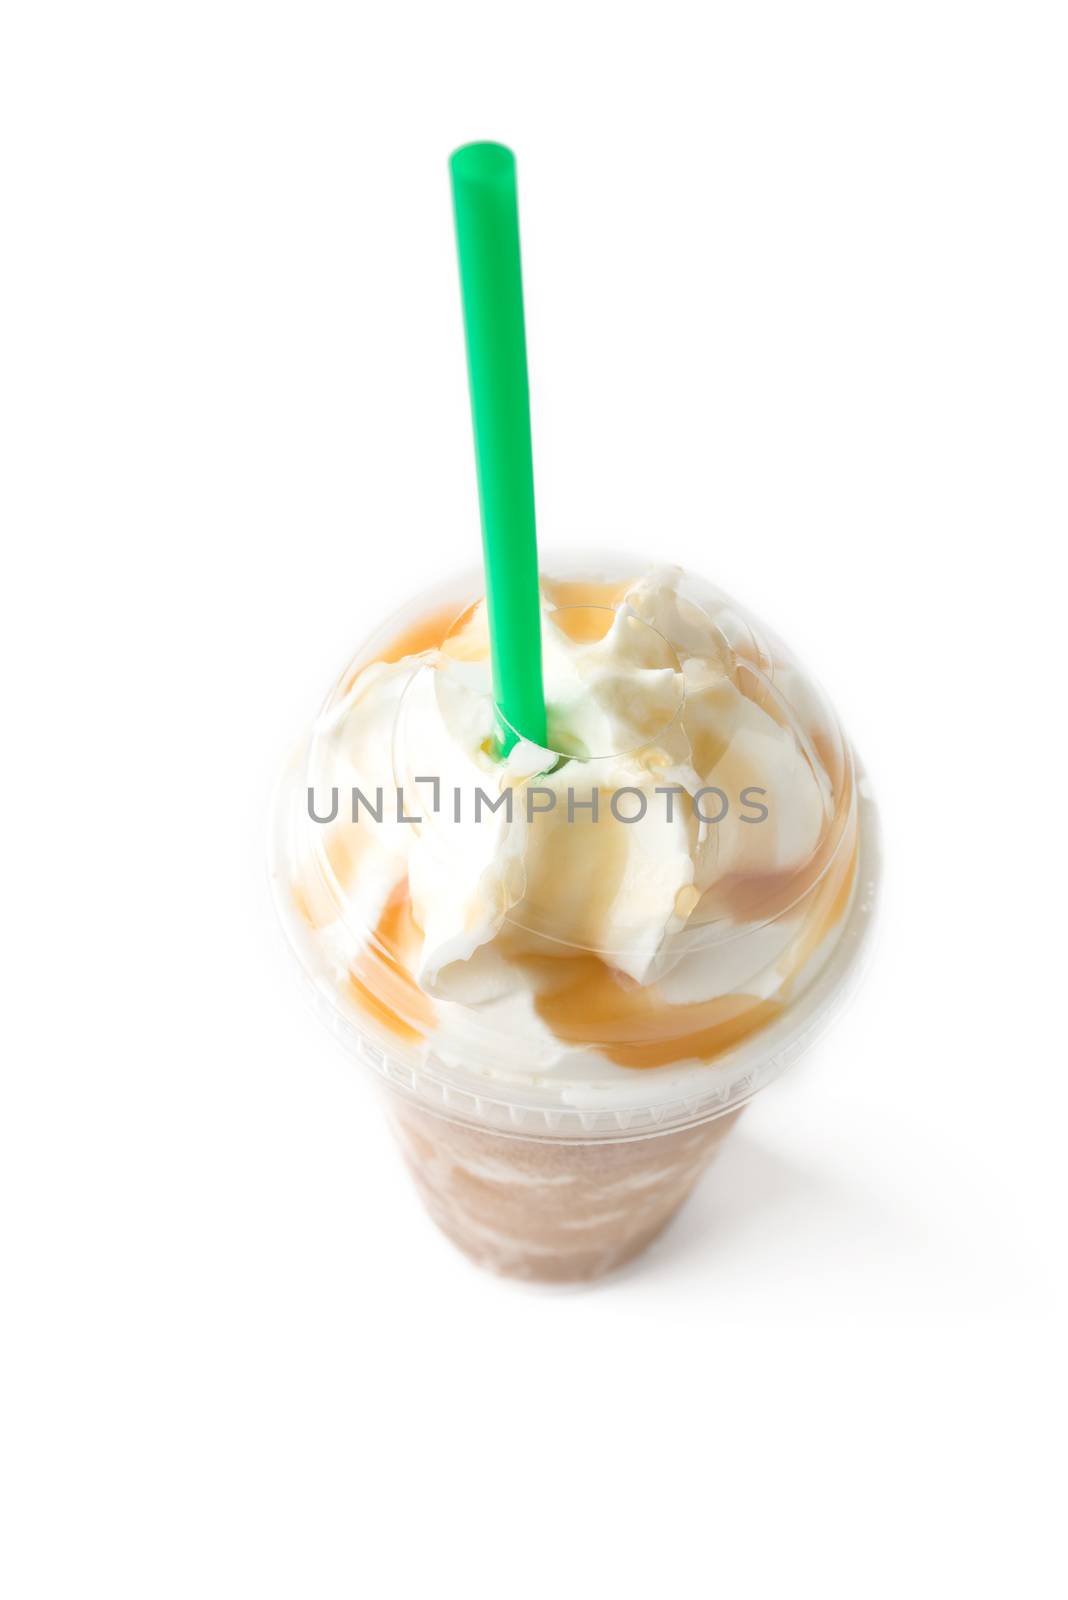 iced coffee with whipped cream